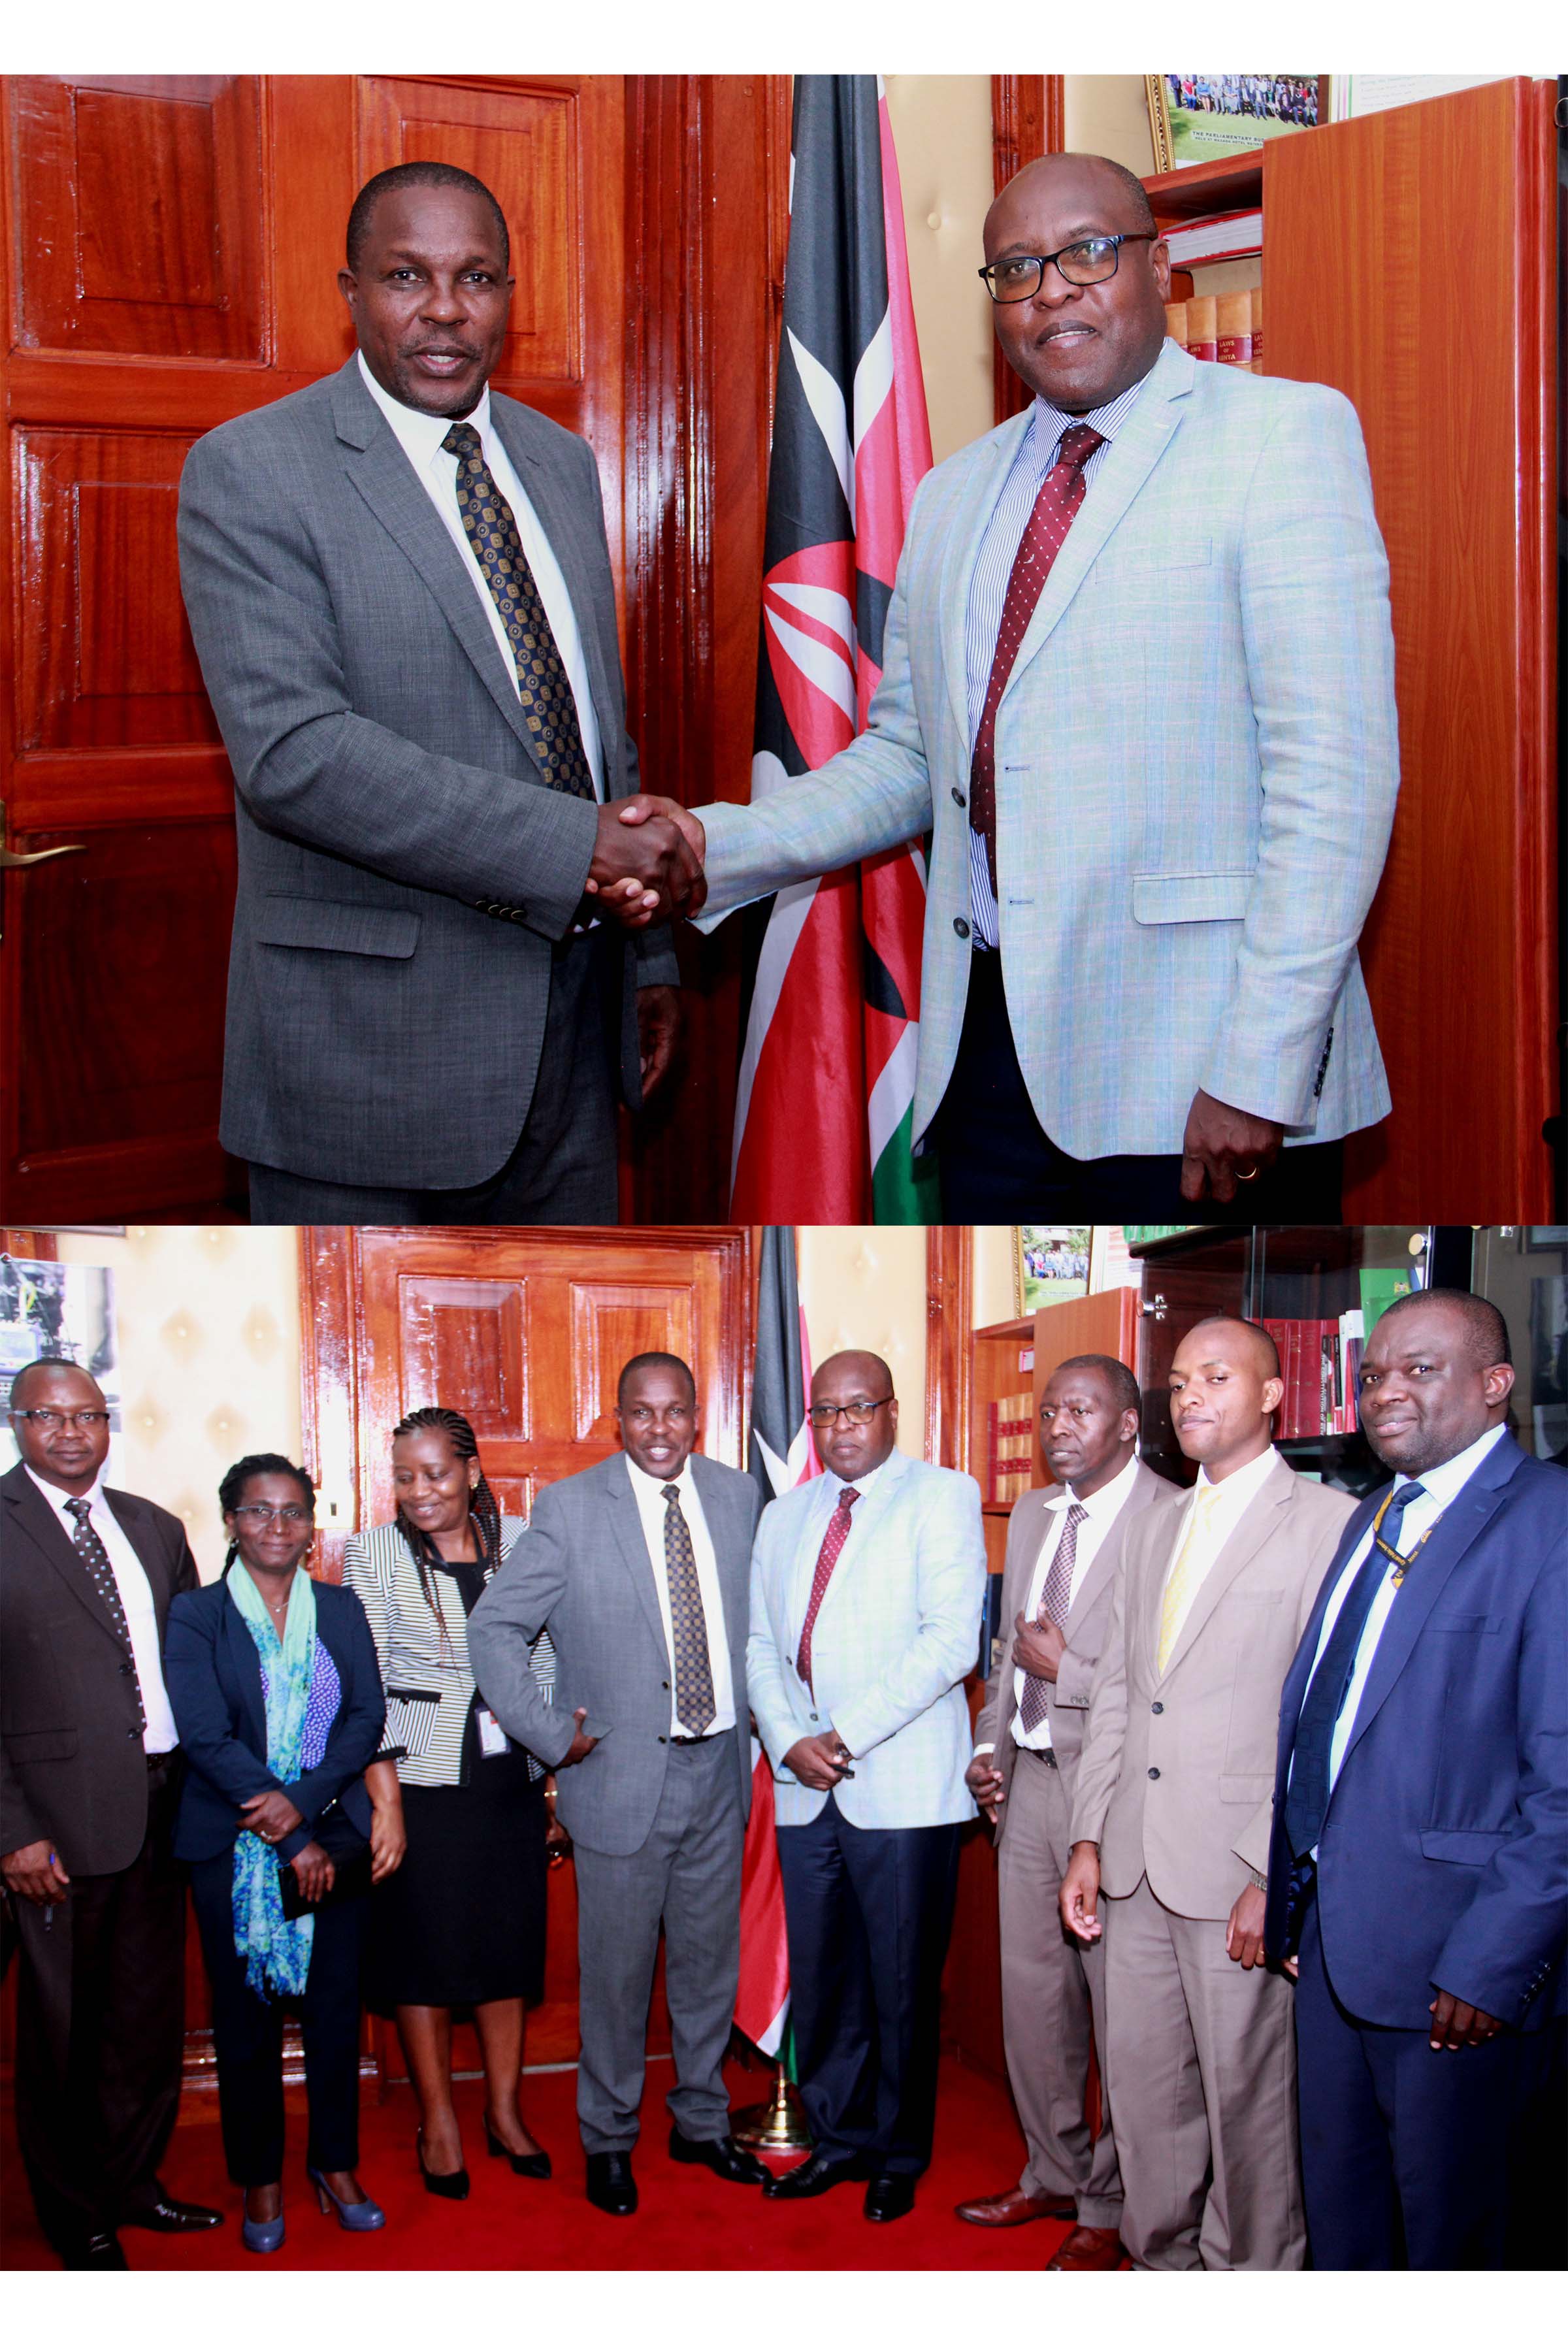 Officers from the Kenya Revenue Authoring Paying a courtesy call to the Clerk of the National Assembly